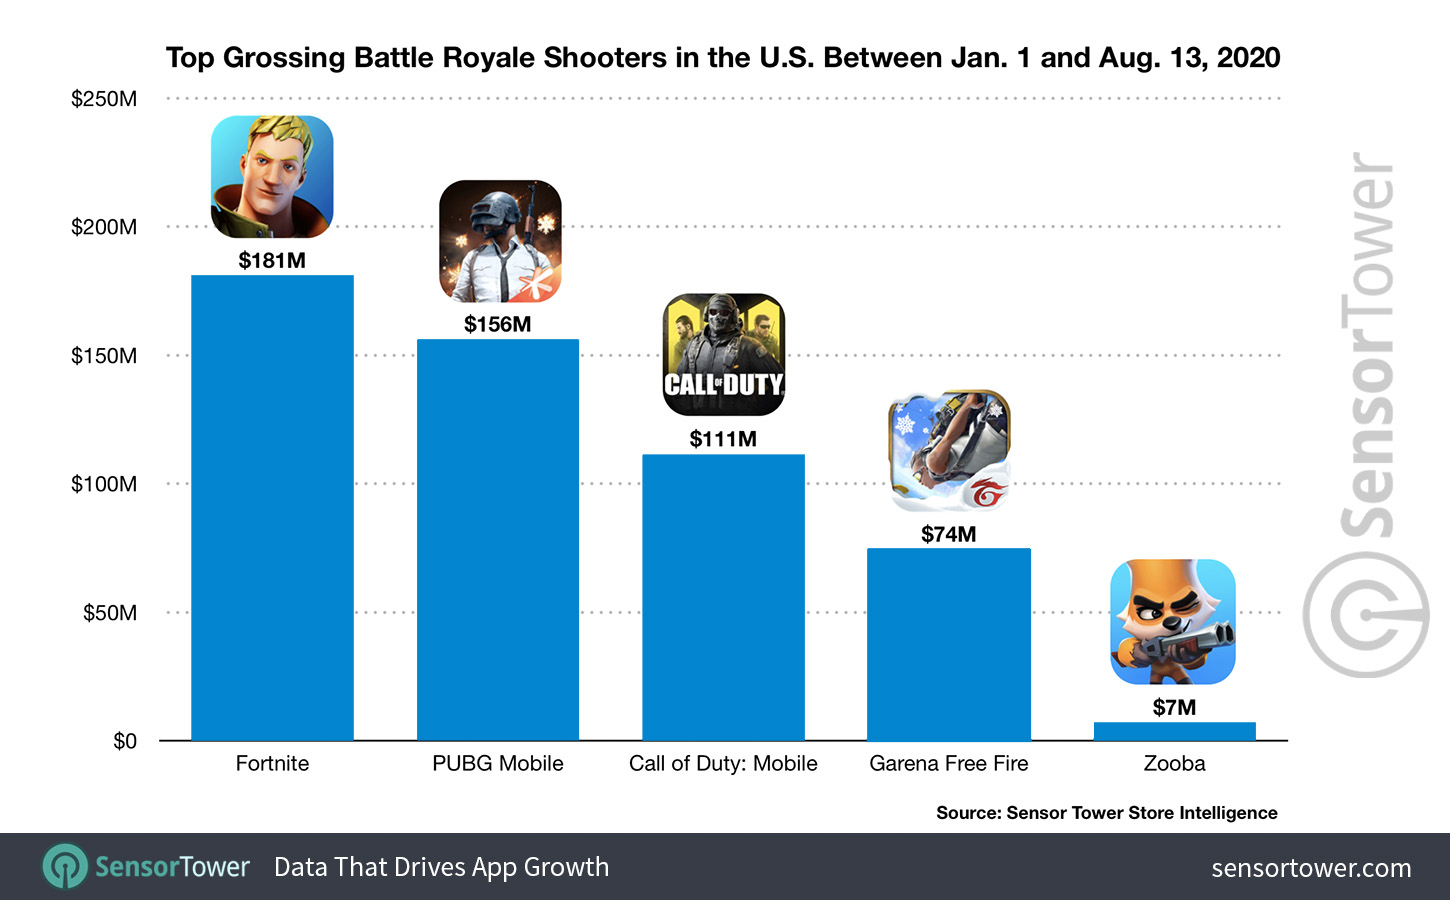 The Top U.S. Battle Royale Shooters by Revenue in 2020